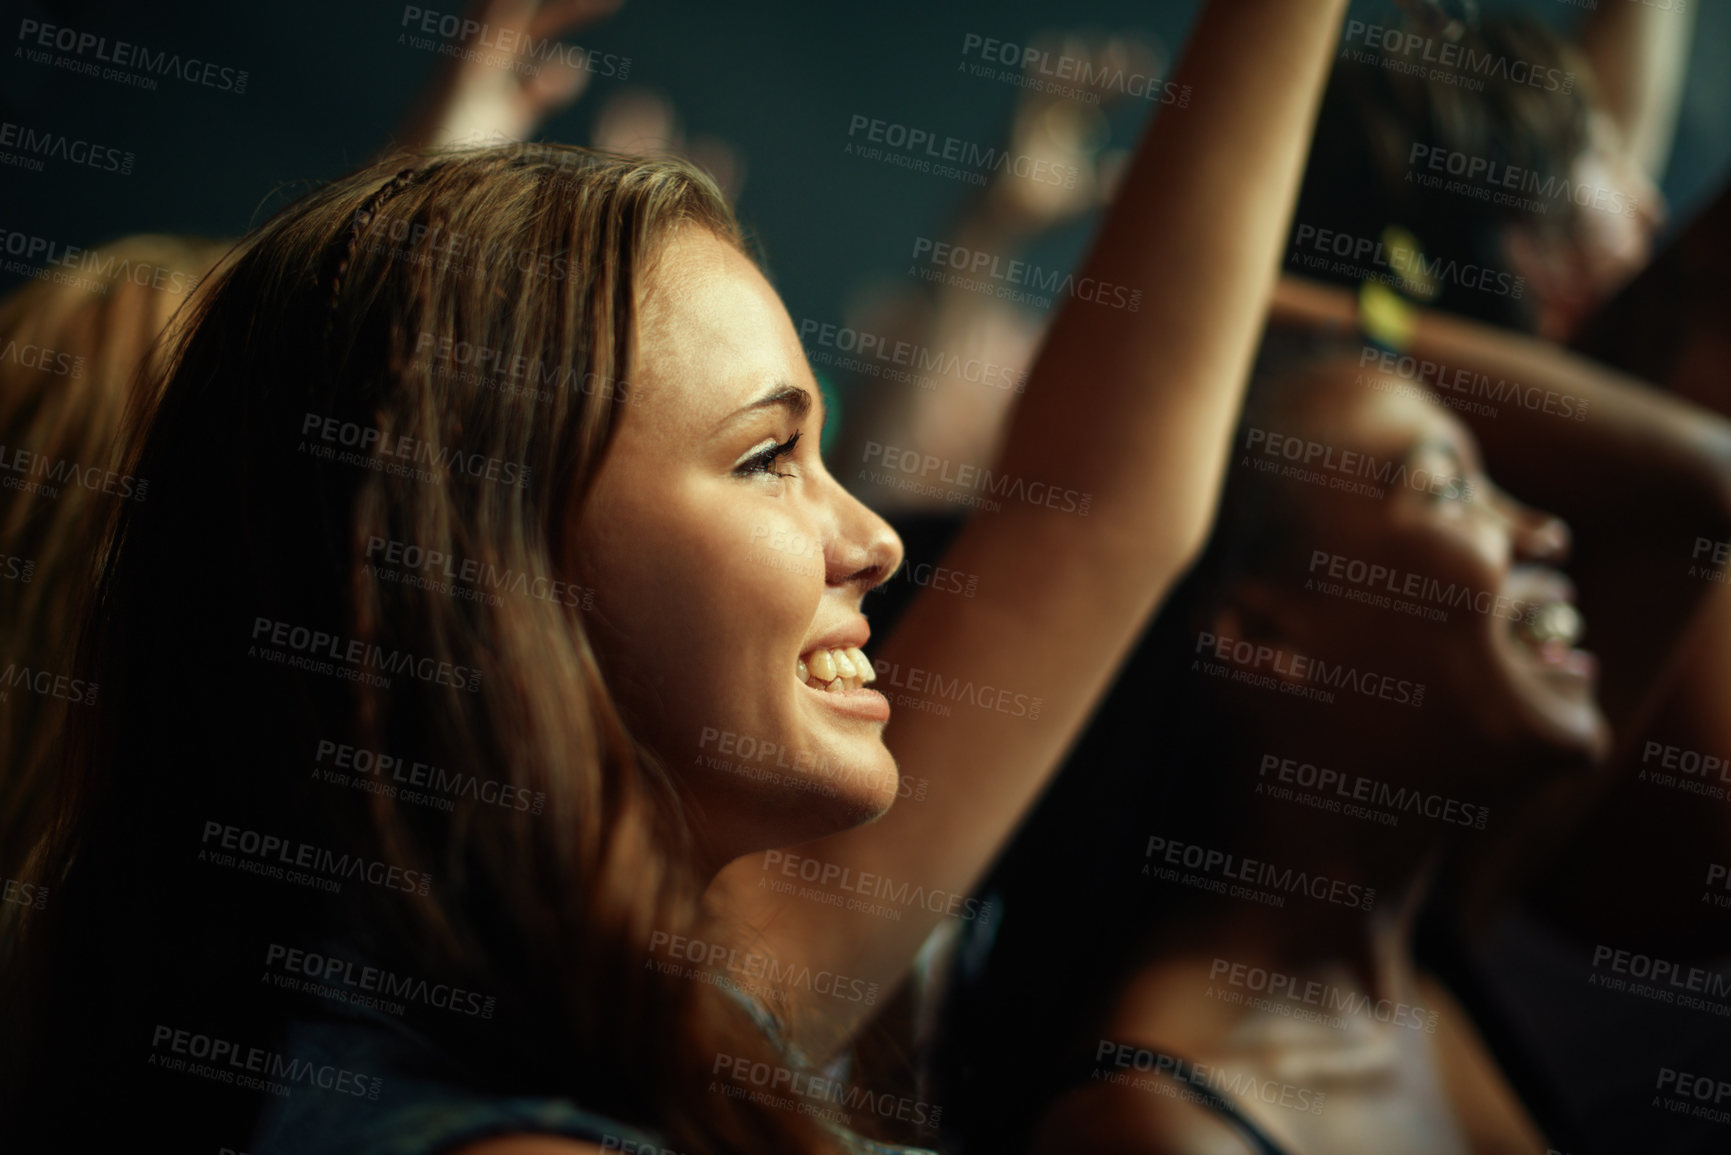 Buy stock photo Young girls in an audience enjoying their favorite band's performance. This concert was created for the sole purpose of this photo shoot, featuring 300 models and 3 live bands. All people in this shoot are model released.